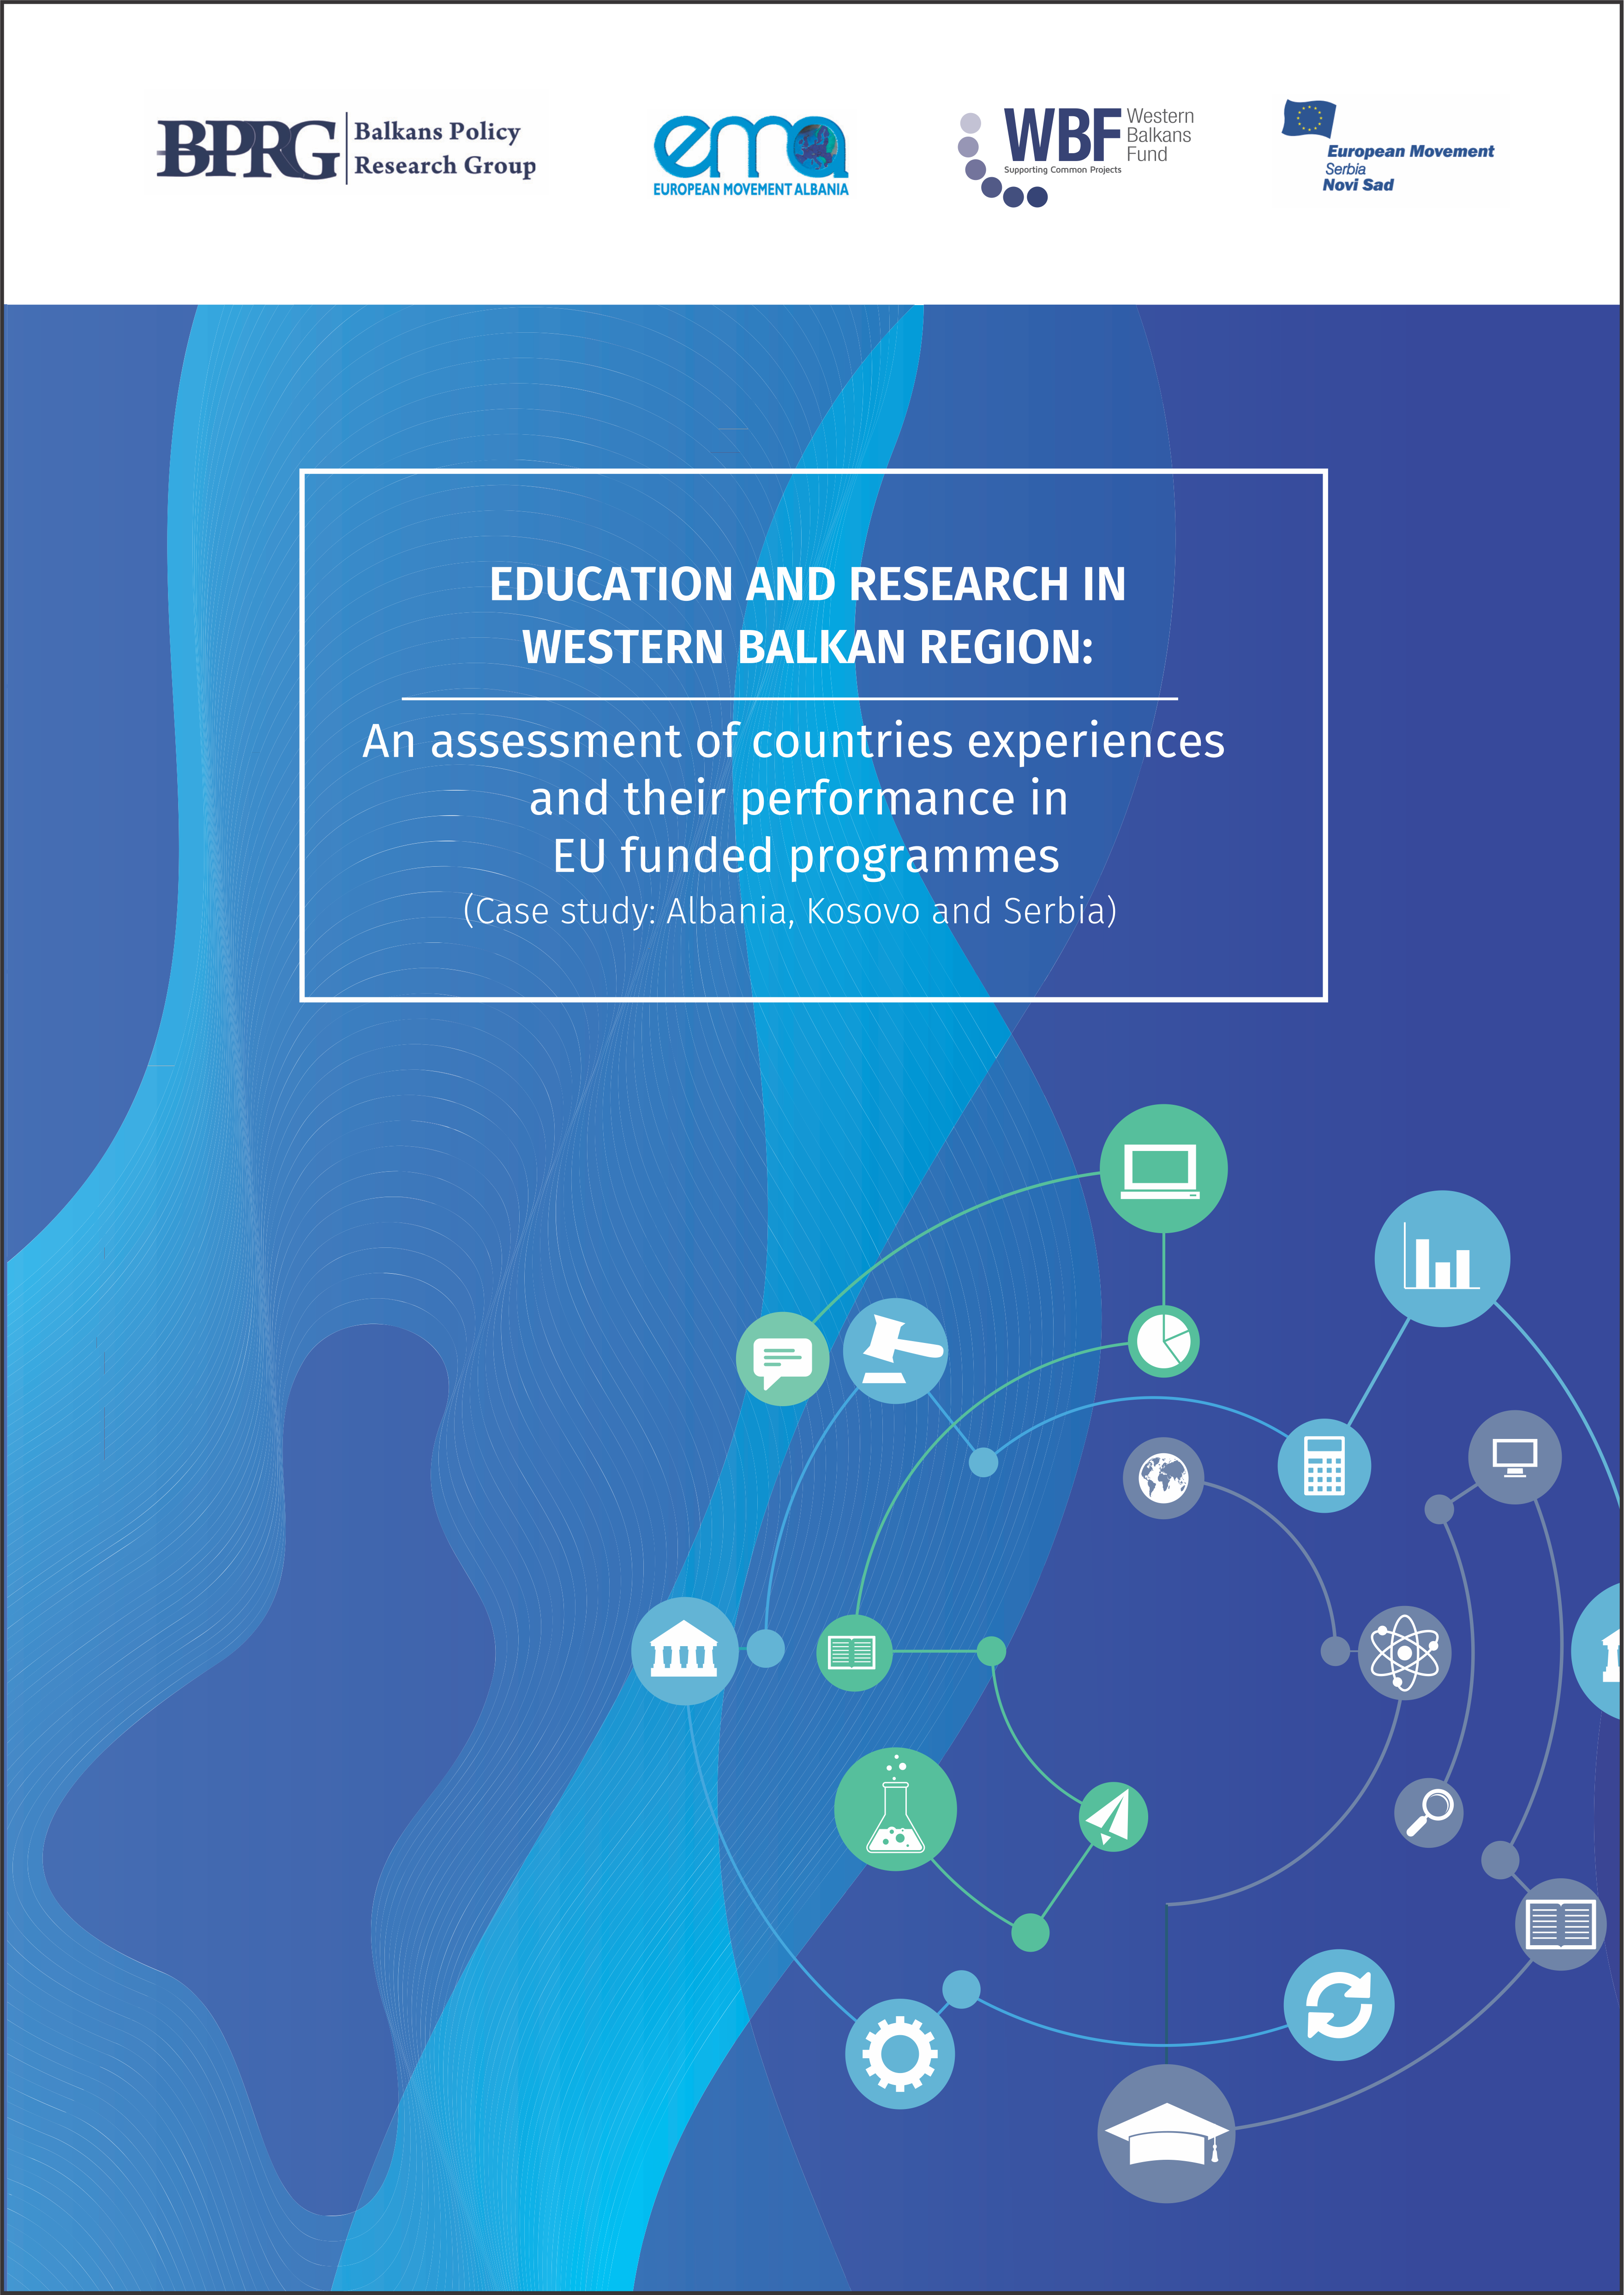 Education and research in Western Balkan Region: An assessment of countries’ experiences and their performance in EU funded programmes (Case study: Albania, Kosovo and Serbia)